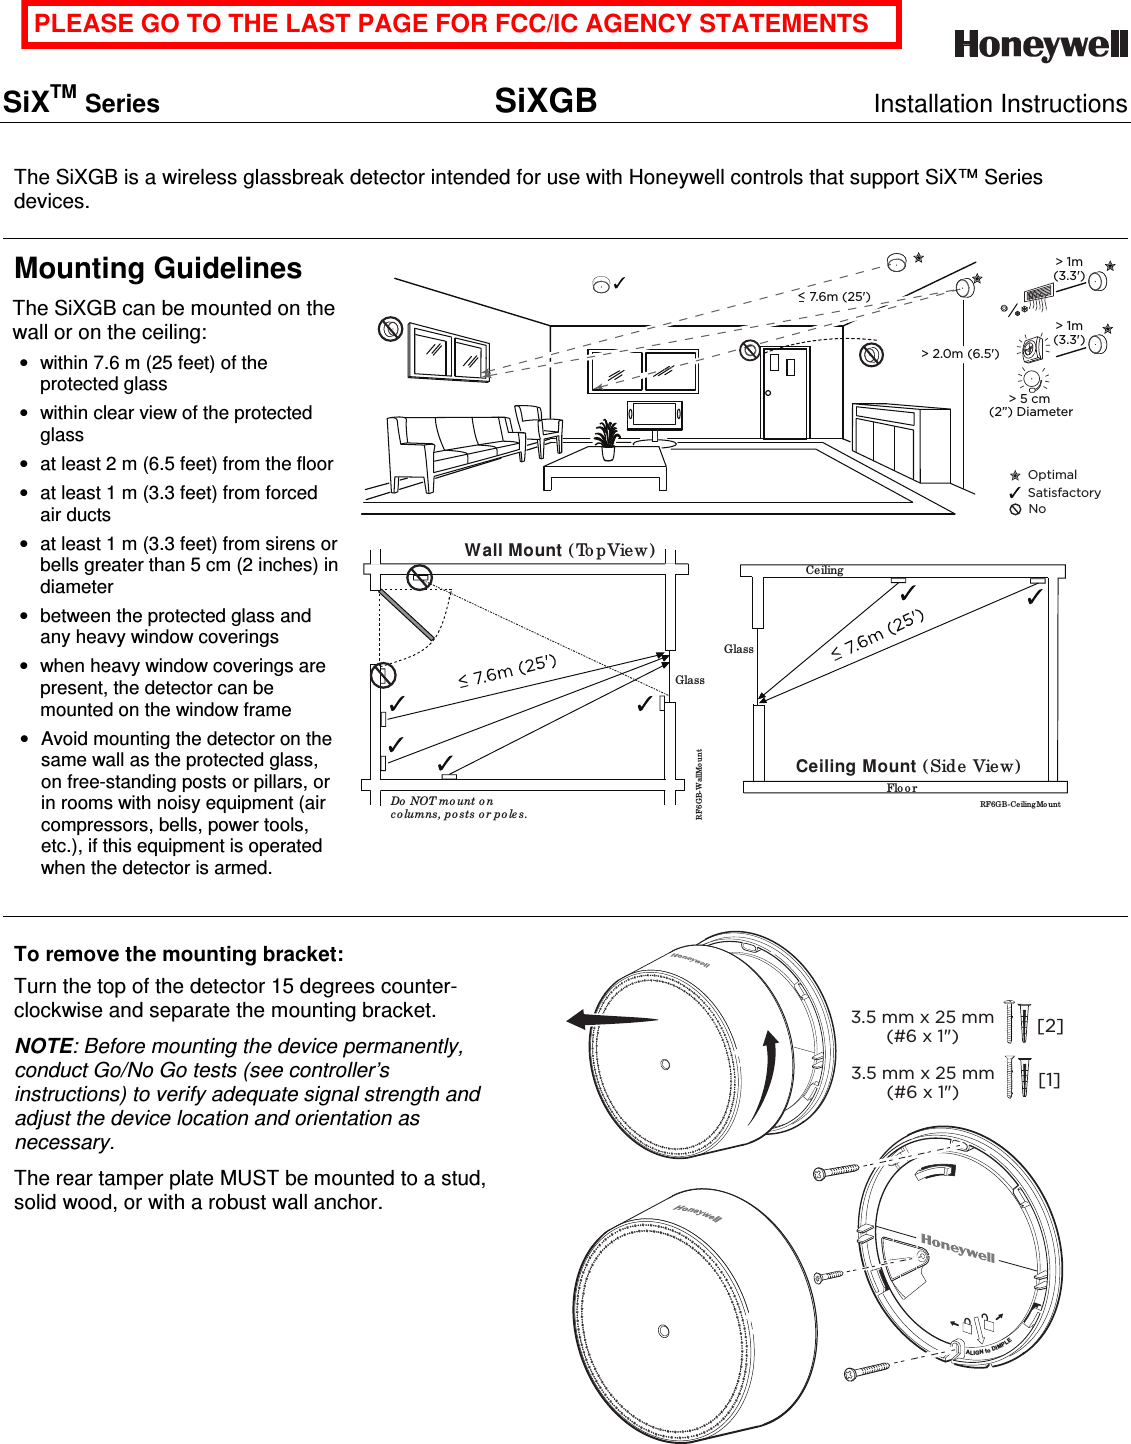    SiXTM Series SiXGB Installation Instructions    The SiXGB is a wireless glassbreak detector intended for use with Honeywell controls that support SiX™ Series devices. Mounting Guidelines The SiXGB can be mounted on the wall or on the ceiling: •  within 7.6 m (25 feet) of the protected glass •  within clear view of the protected glass •  at least 2 m (6.5 feet) from the floor •  at least 1 m (3.3 feet) from forced air ducts •  at least 1 m (3.3 feet) from sirens or bells greater than 5 cm (2 inches) in diameter •  between the protected glass and any heavy window coverings •  when heavy window coverings are present, the detector can be mounted on the window frame •  Avoid mounting the detector on the same wall as the protected glass, on free-standing posts or pillars, or in rooms with noisy equipment (air compressors, bells, power tools, etc.), if this equipment is operated when the detector is armed. &gt; 2.0m (6.5&apos;) OptimalSatisfactoryNo&gt; 1m (3.3&apos;) &lt; 7.6m (25&apos;) &gt; 1m (3.3&apos;) &gt; 5 cm (2”) Diameter RF6 GB-WallMo untWall Mount ( To pView)Do  NOT mo unt o n co lumns, p o sts o r po les.Glass  Ceiling Mount (Side View)RF6G B-Ce iling Mo untCeilingGlassFlo o r To remove the mounting bracket: Turn the top of the detector 15 degrees counter-clockwise and separate the mounting bracket. NOTE: Before mounting the device permanently, conduct Go/No Go tests (see controller’s instructions) to verify adequate signal strength and adjust the device location and orientation as necessary. The rear tamper plate MUST be mounted to a stud, solid wood, or with a robust wall anchor.  3.5 mm x 25 mm(#6 x 1&quot;) [2]3.5 mm x 25 mm(#6 x 1&quot;) [1]ALIGN to DIMPLE  PLEASE GO TO THE LAST PAGE FOR FCC/IC AGENCY STATEMENTS